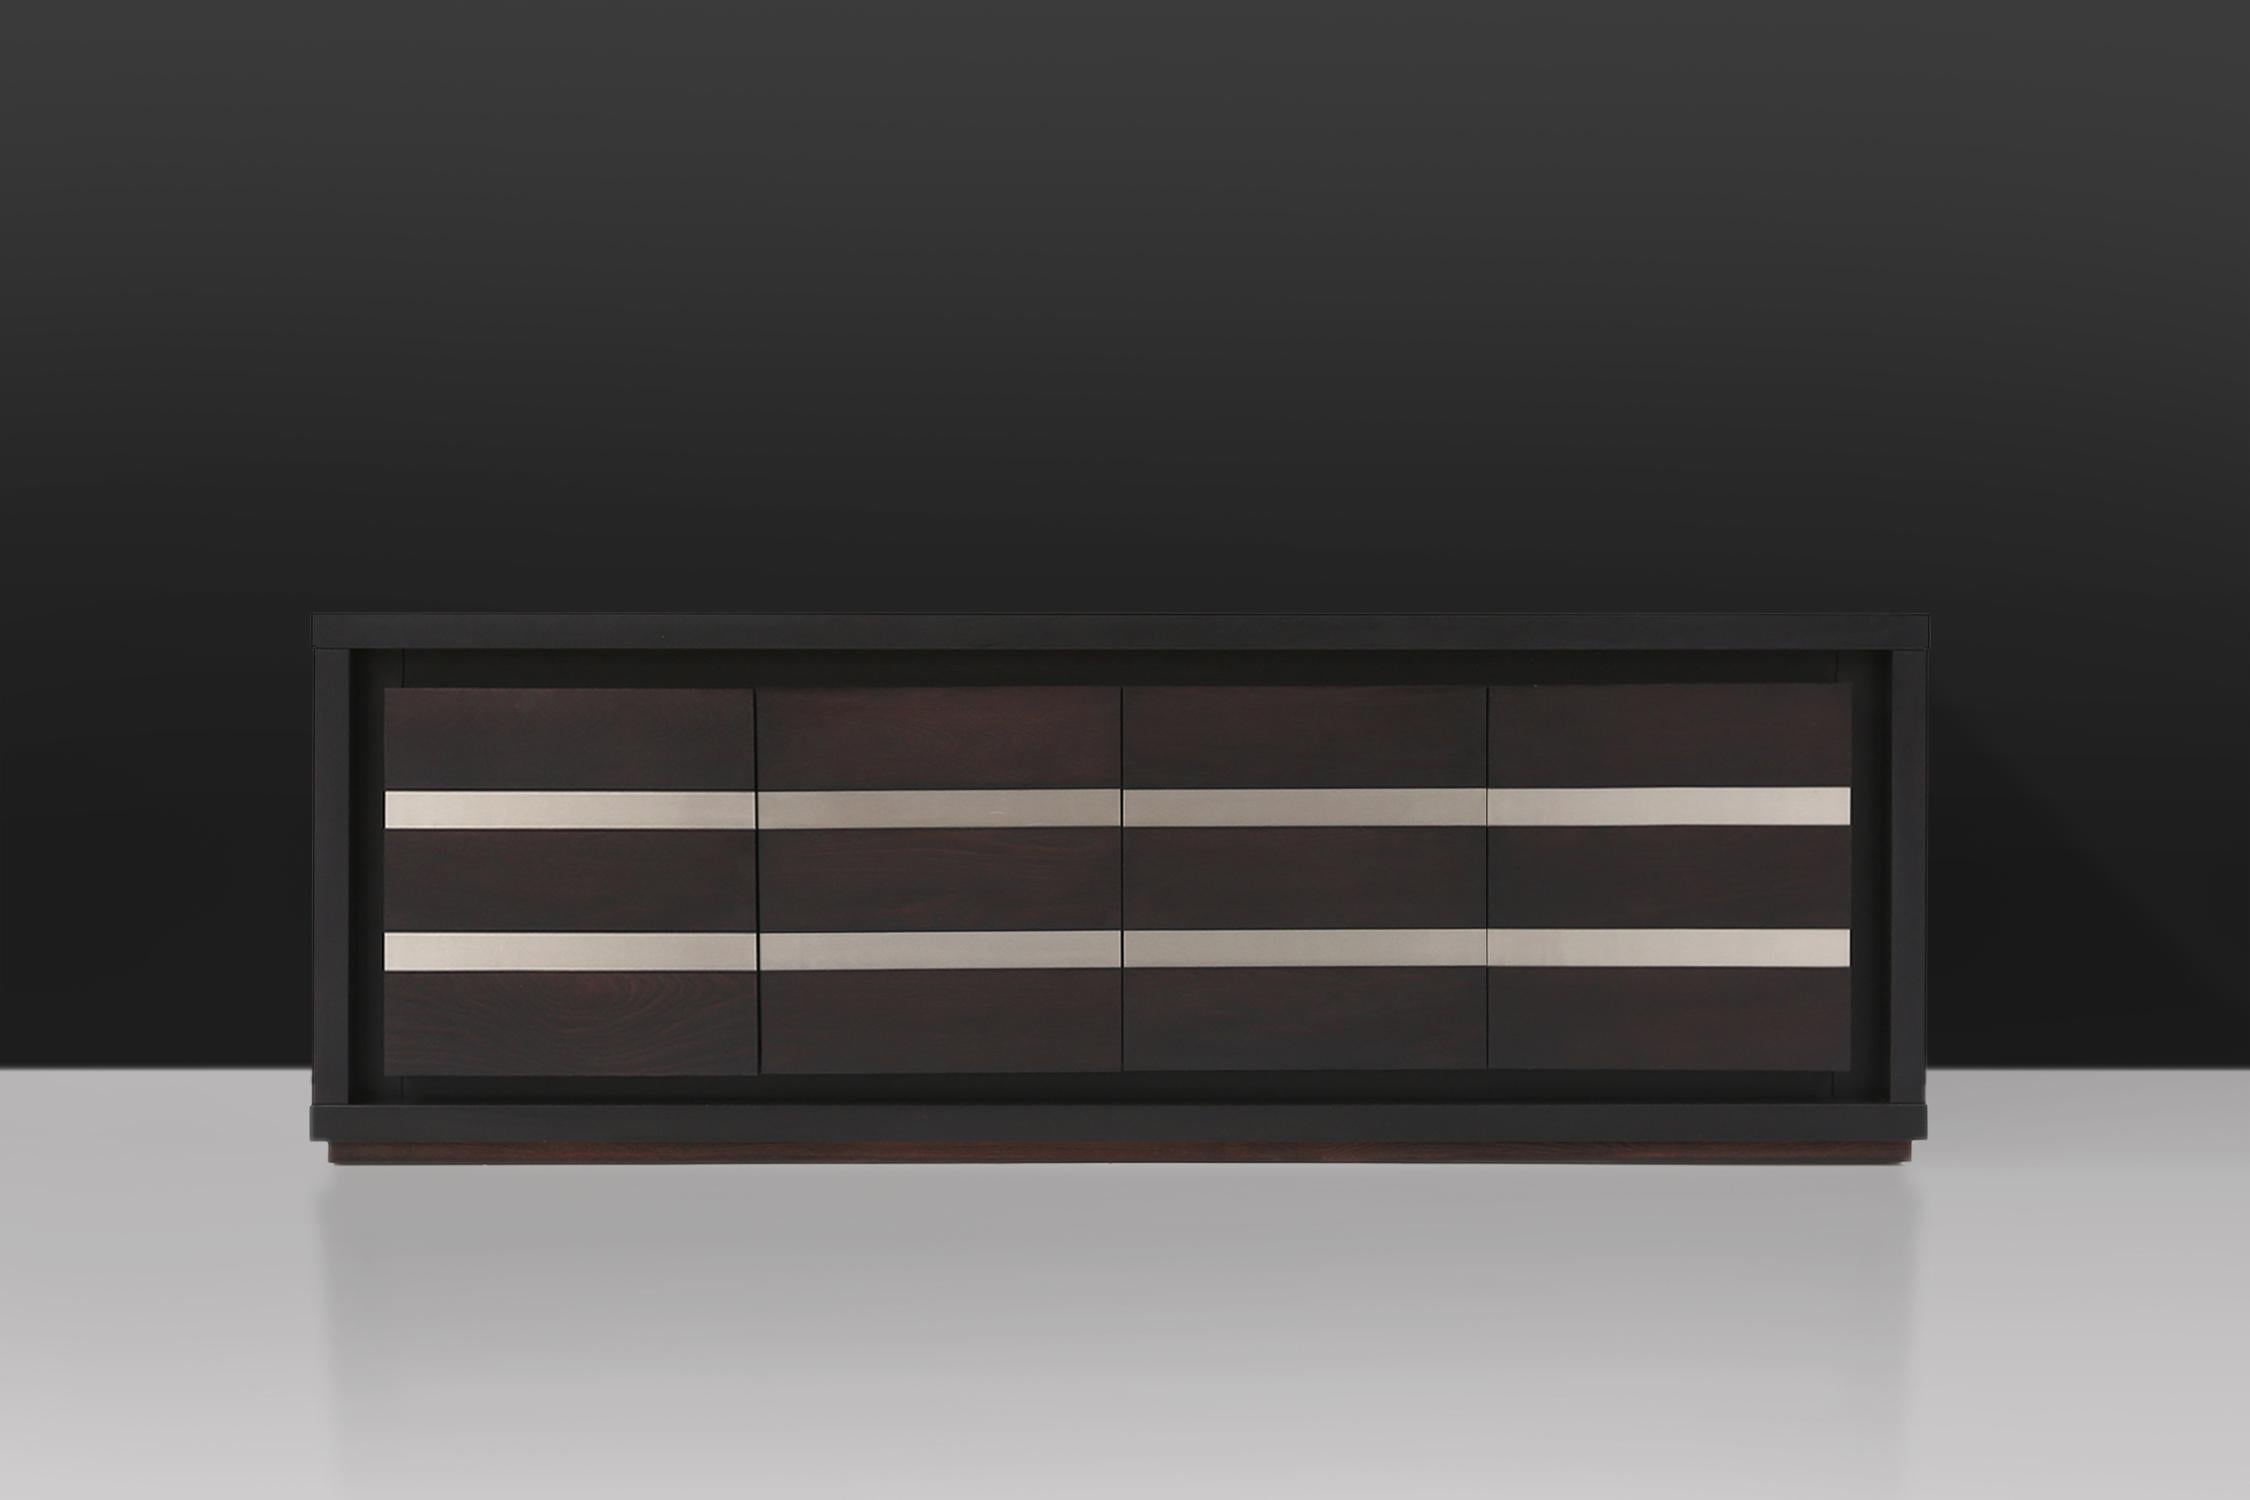 Belgian sideboard made of black oak.
This high quality credenza has 4 door panels with two aluminium strips. The shelves can be adjust in height.